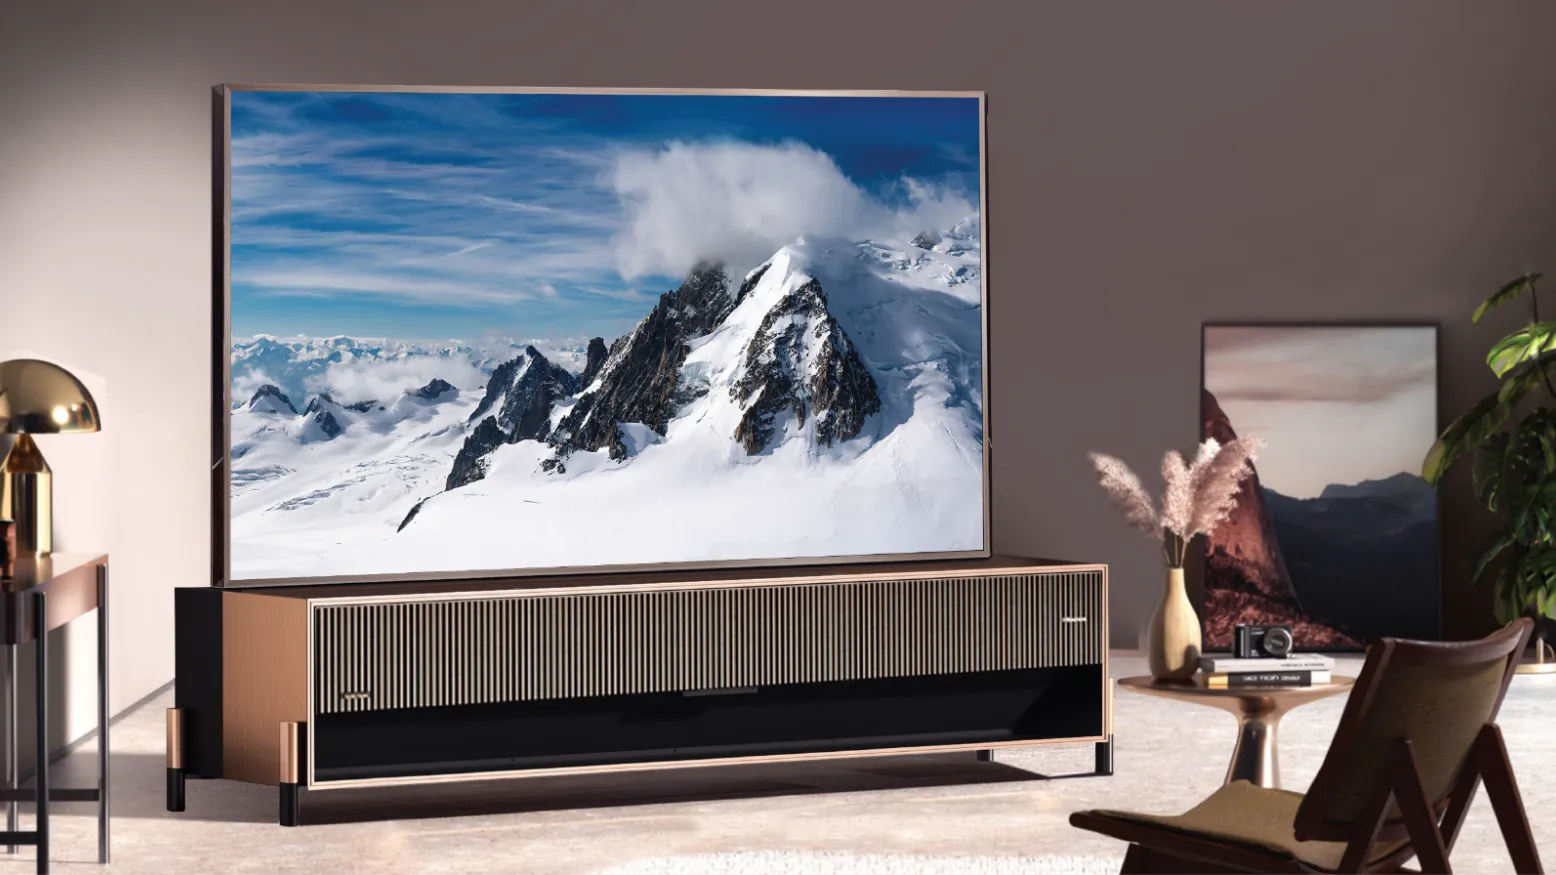 Rollable Laser TV: Hisense unveils 110 TV with 10,000 nits brightness and 40,000 backlighting zones